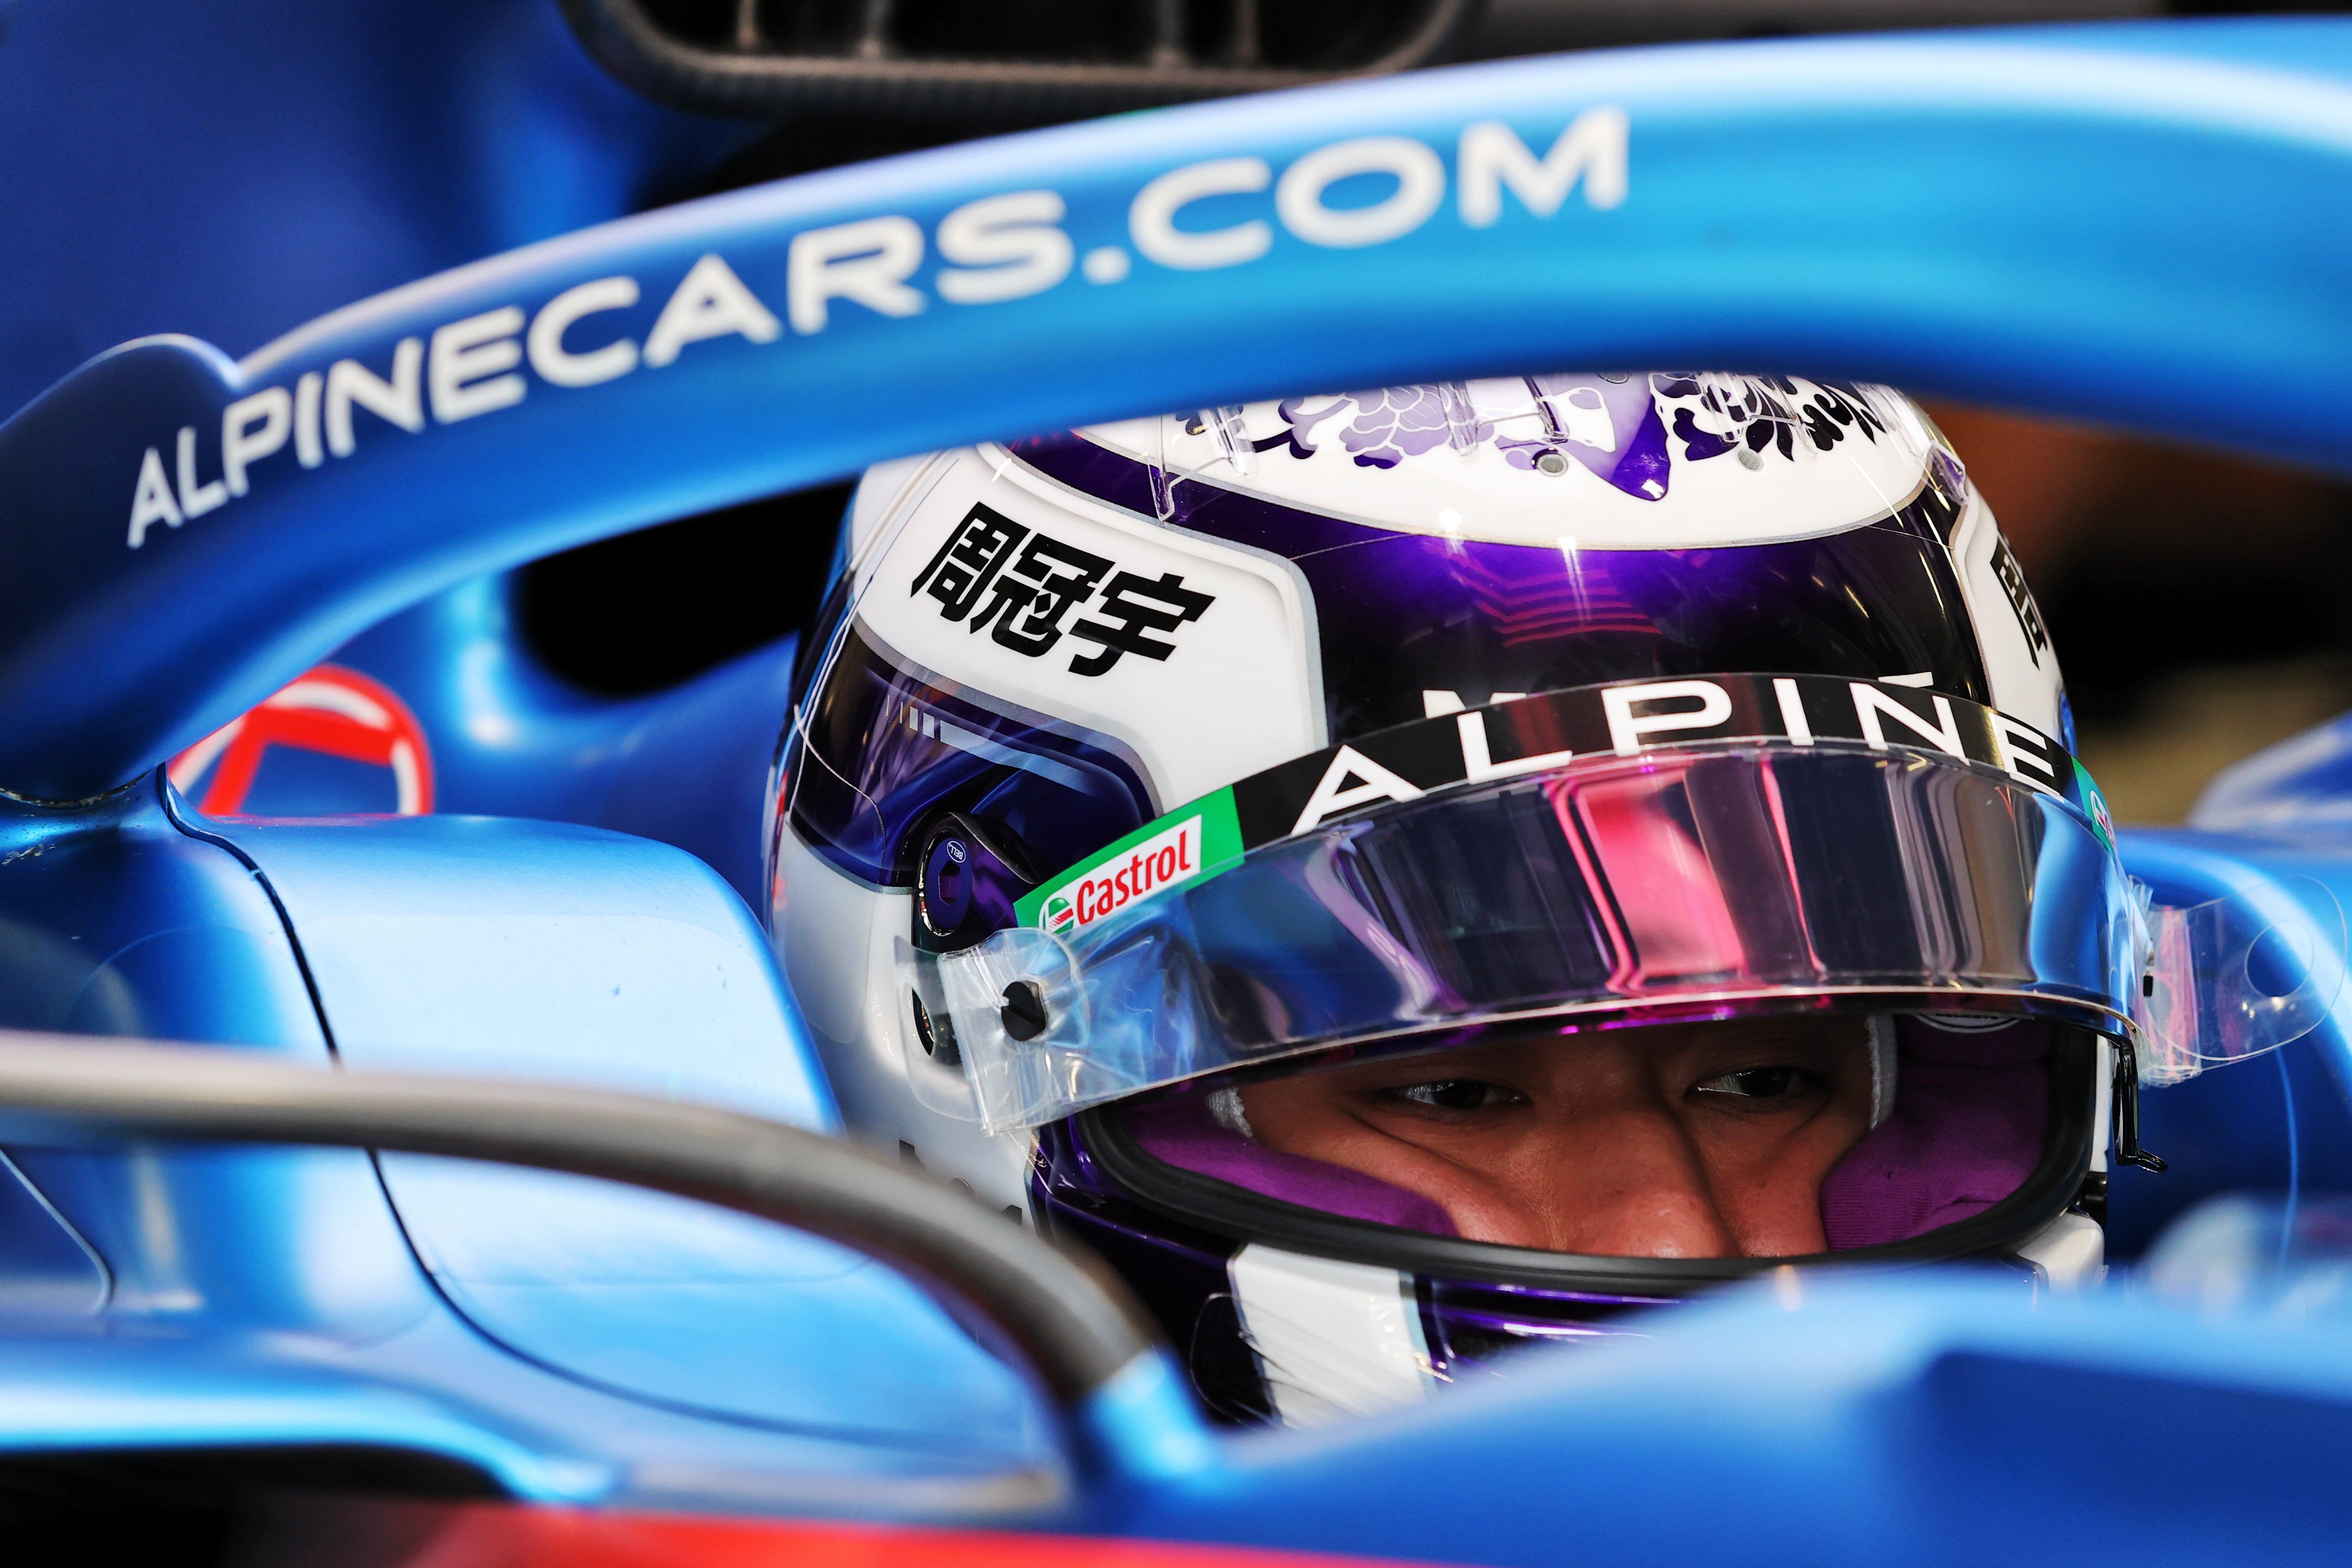 Zhou Guanyu sits behind the wheel of Fernando Alonso’s car during the first free practice session for the Austrian Grand Prix in Spielberg in July